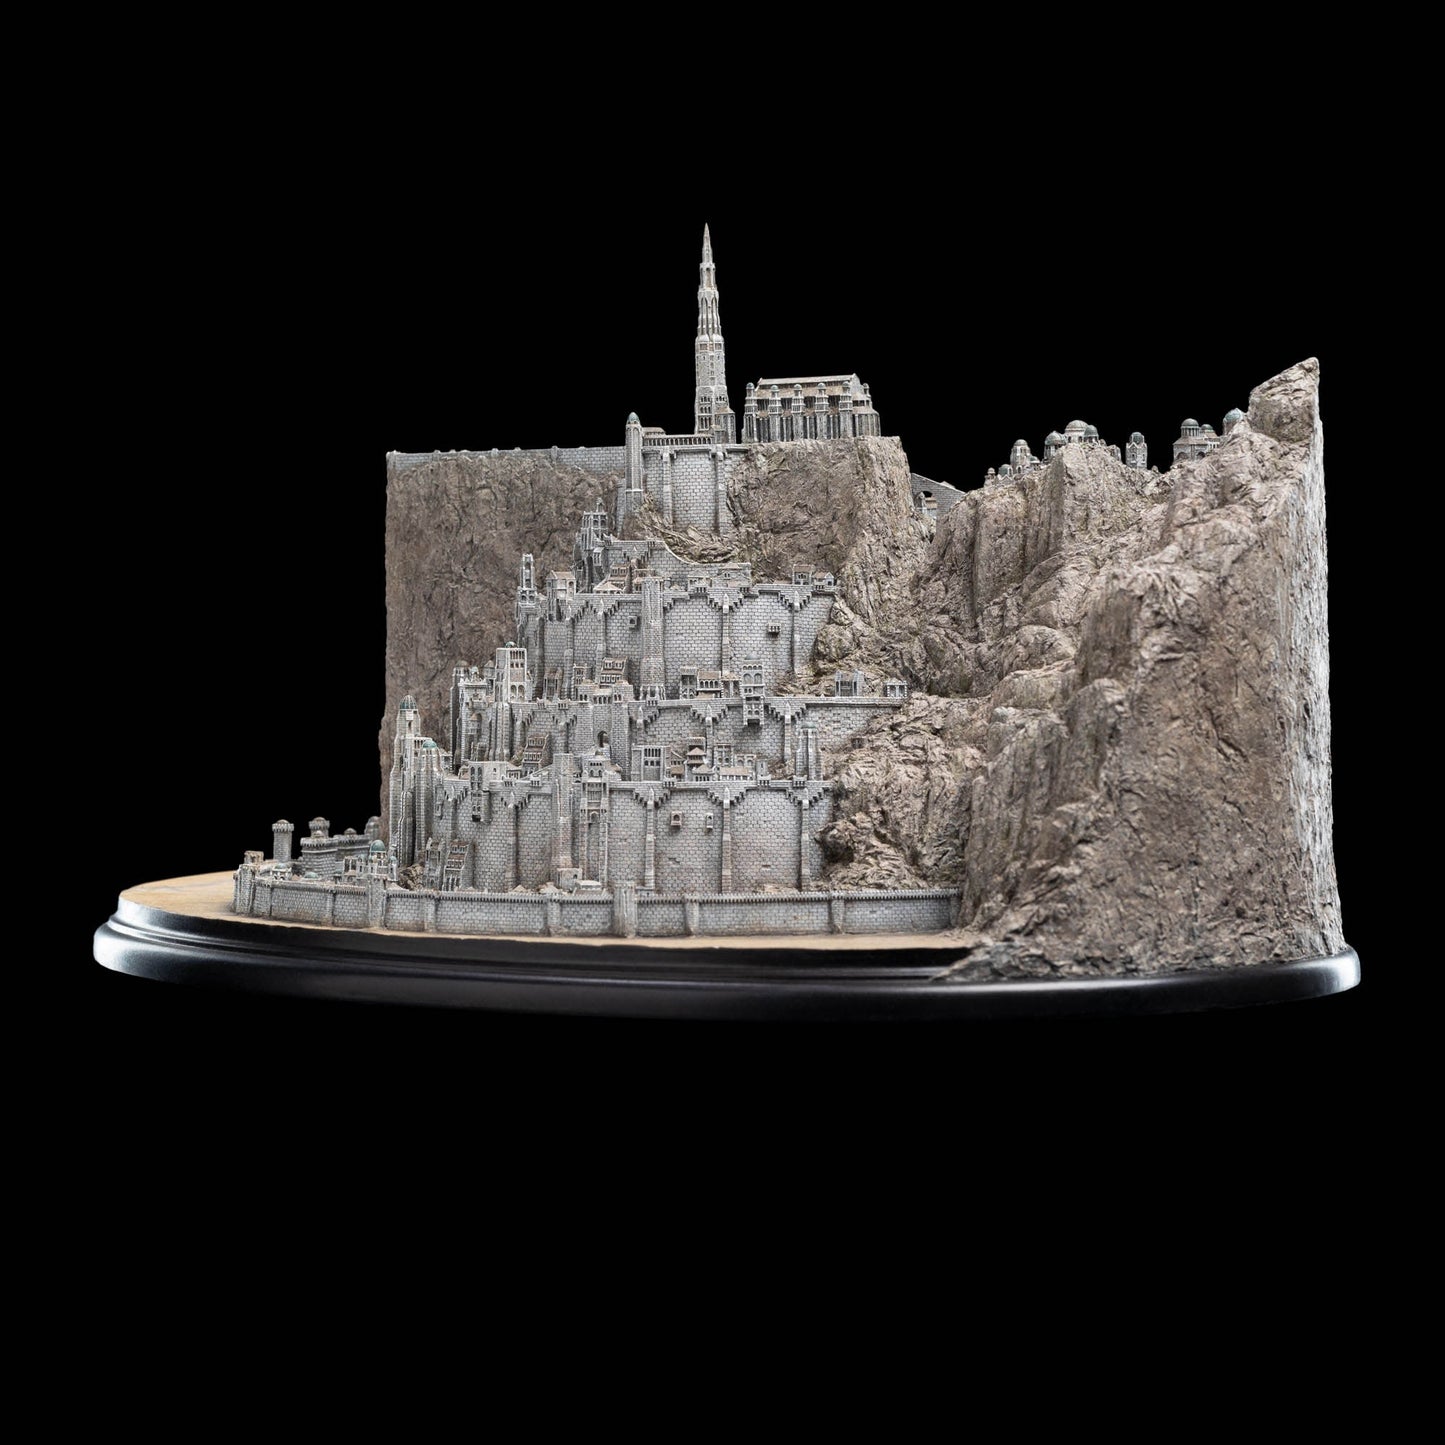 Minas Tirith Deluxe Environment Statue by Weta Workshop